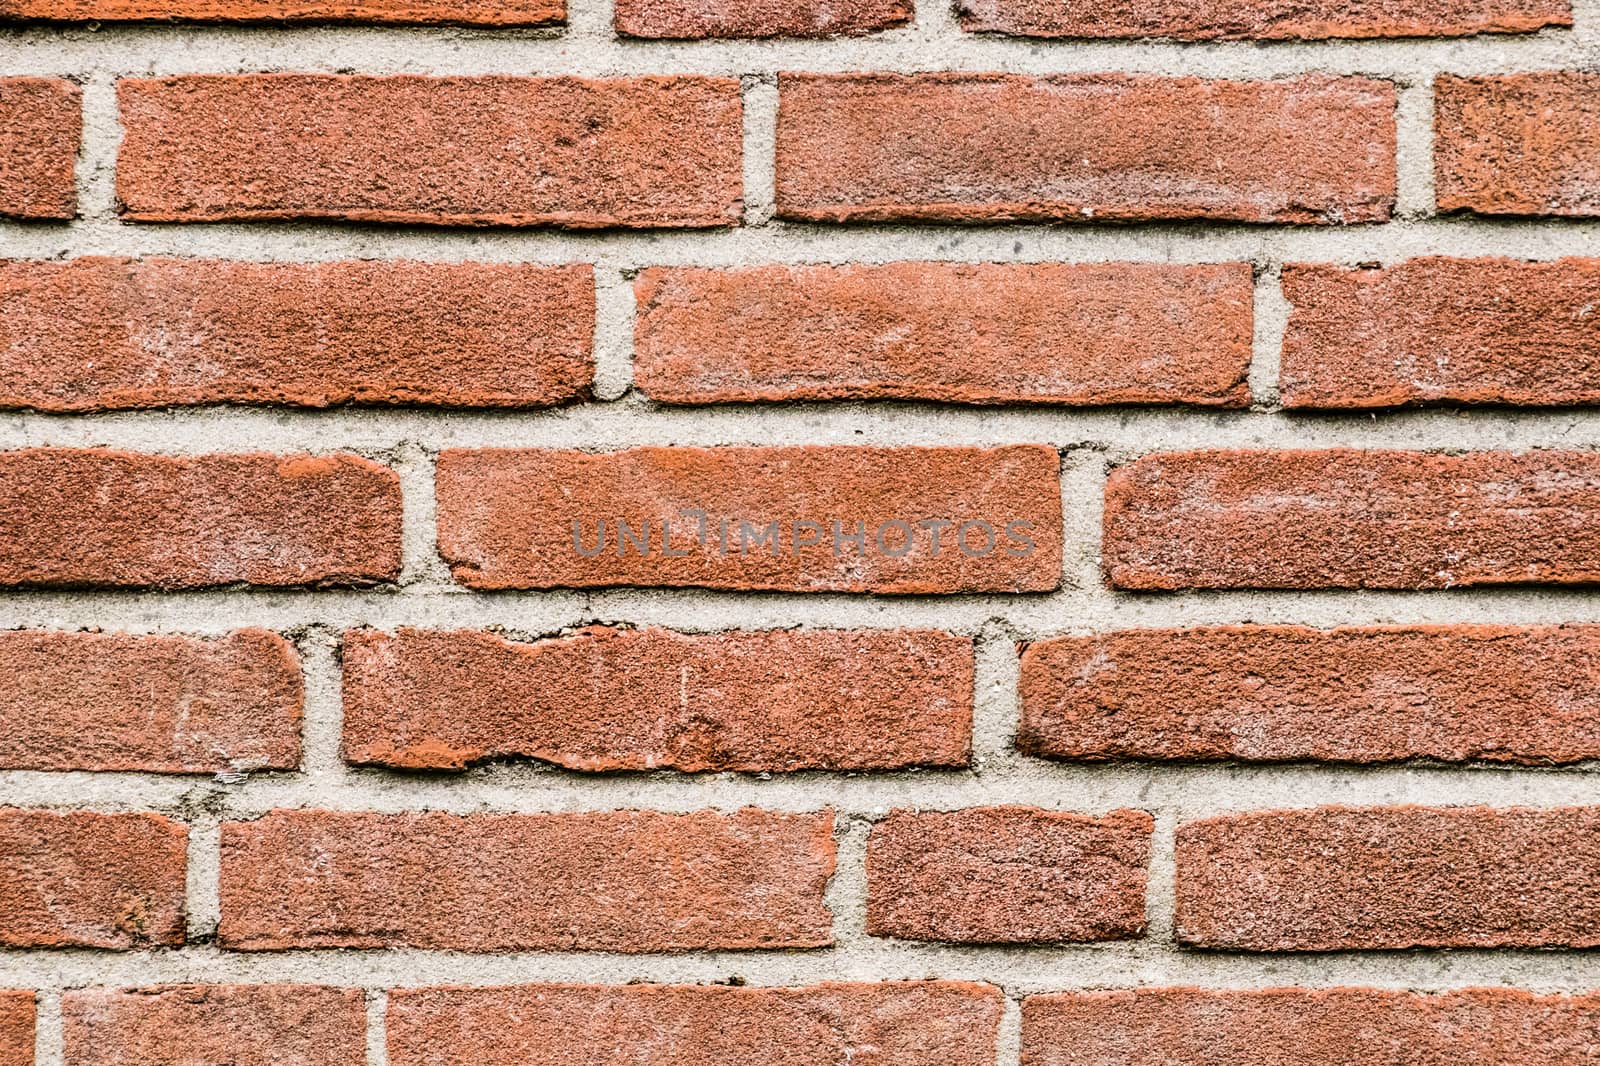 Red brick wall old stones bricks white grey joints by MXW_Stock